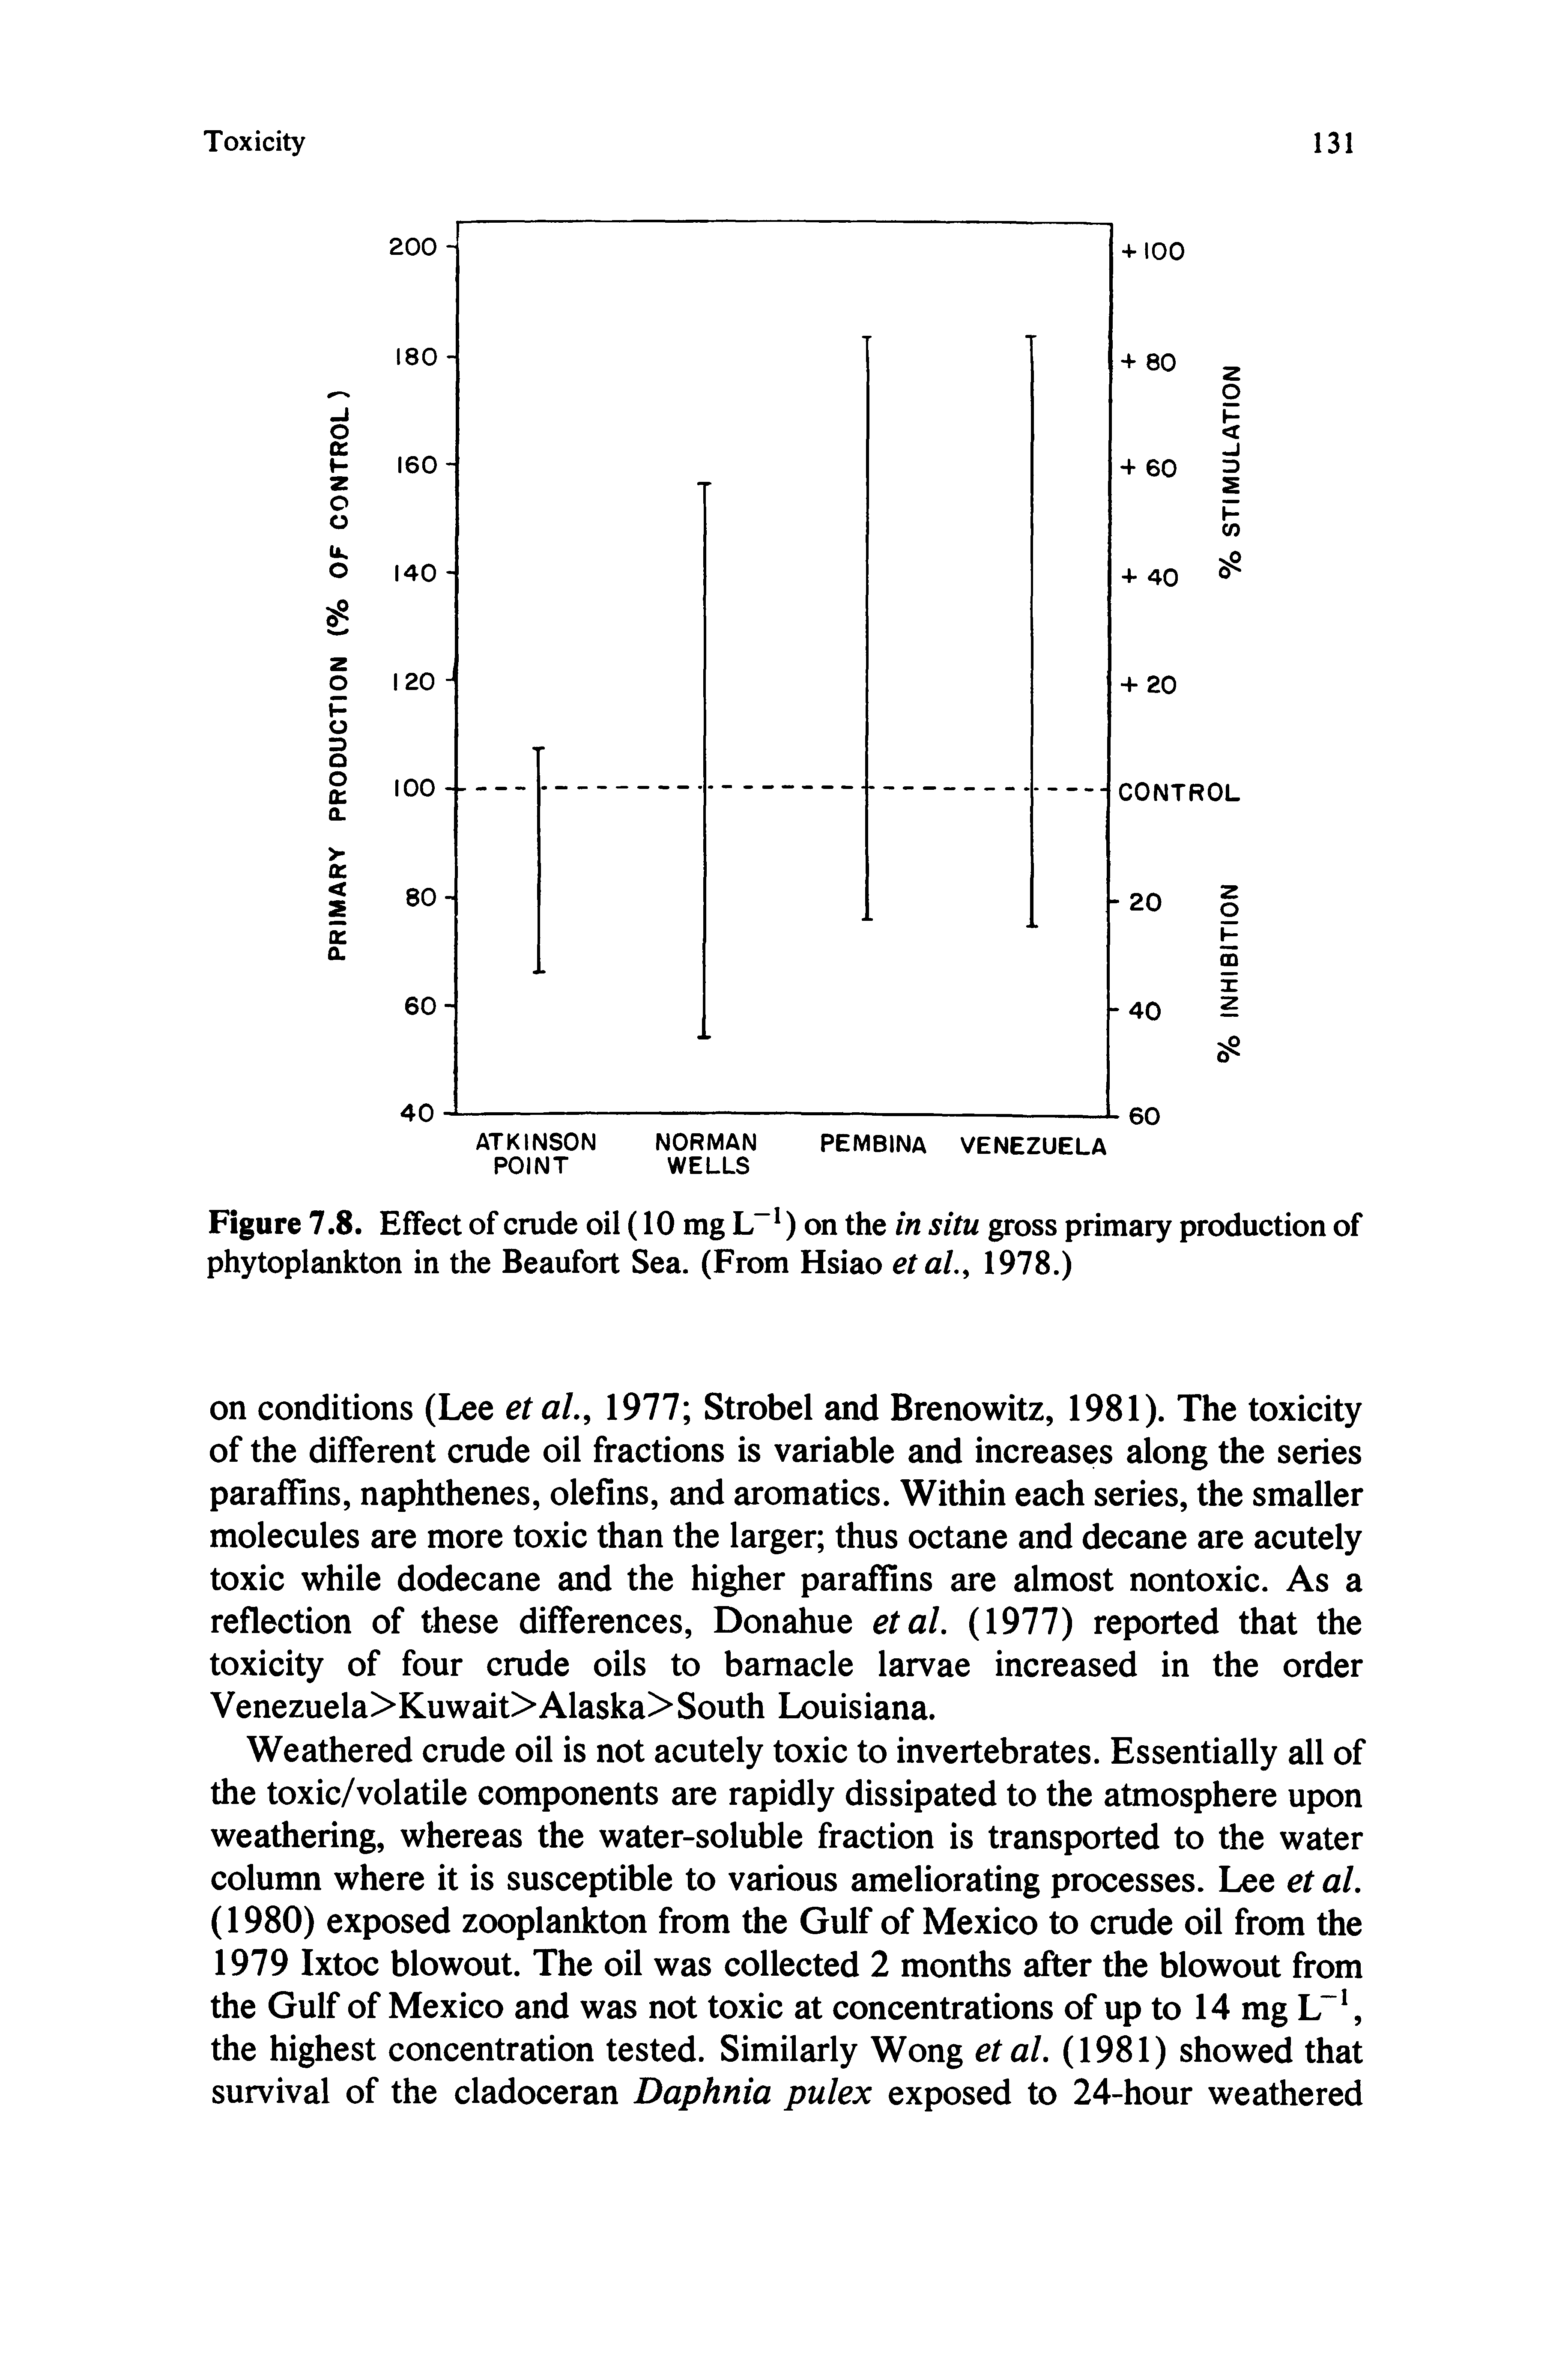 Figure 7.8. Effect of crude oil (10 mg L ) on the in situ gross primary production of phytoplankton in the Beaufort Sea. (From Hsiao etal, 1978.)...